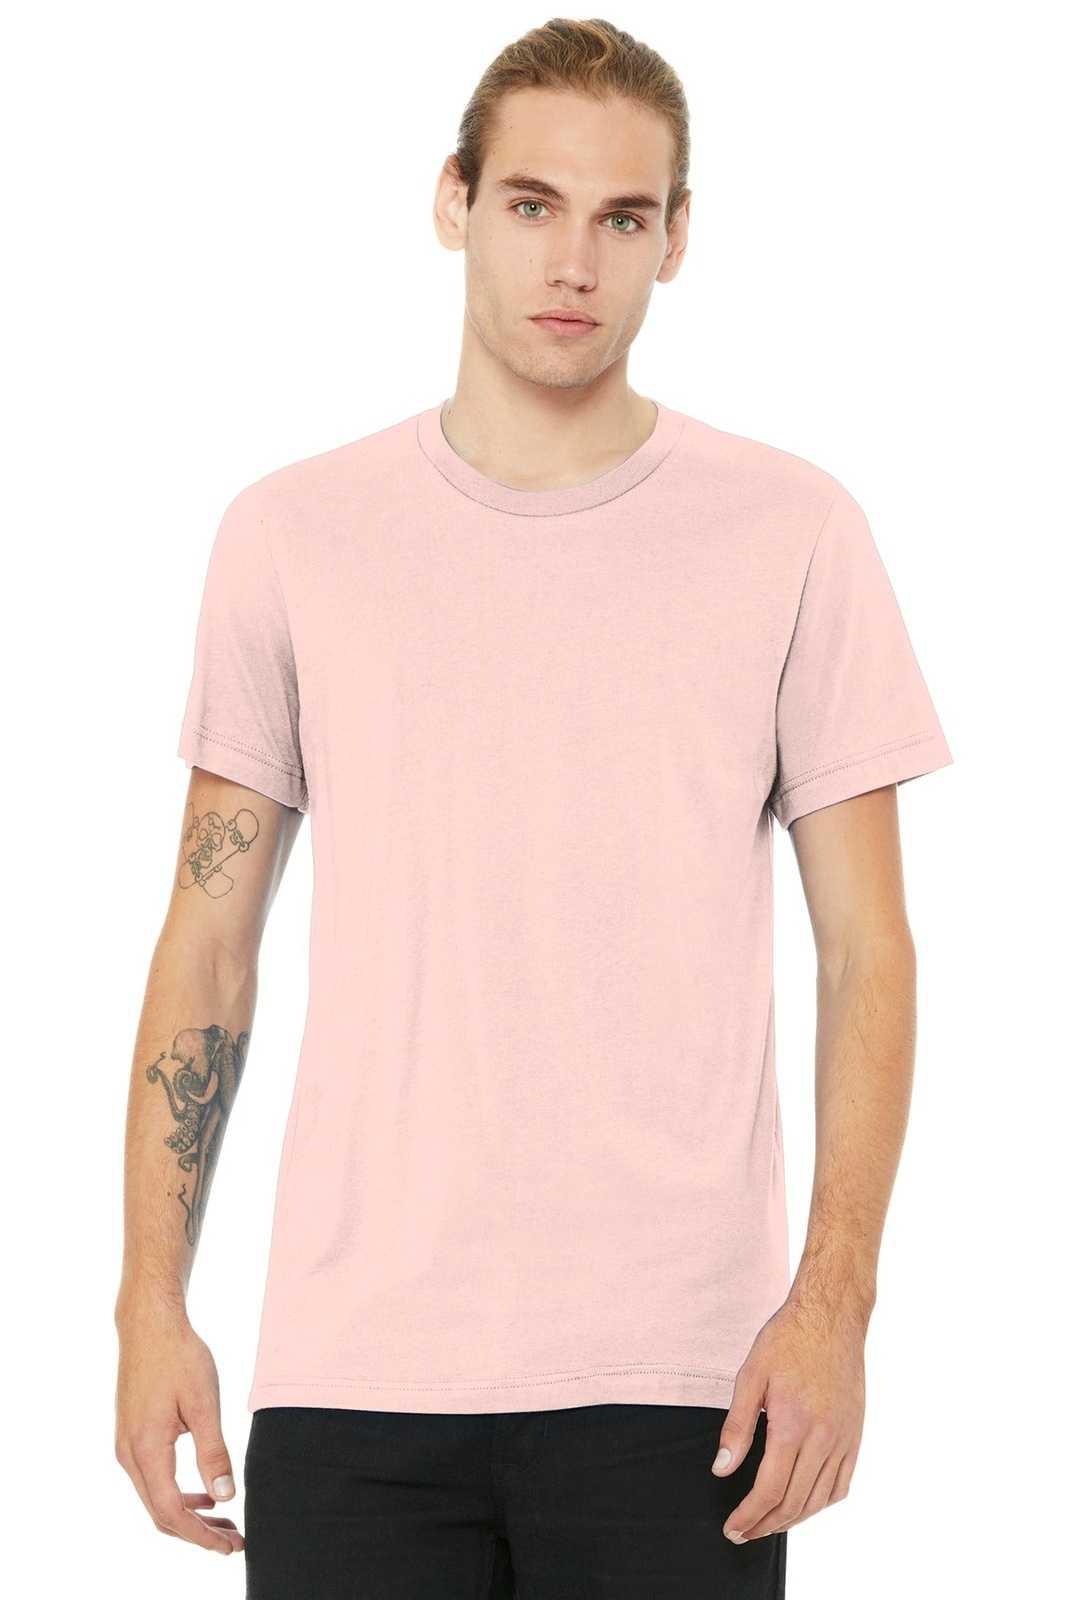 Bella + Canvas 3001 Unisex Jersey Short Sleeve Tee - Soft Pink - HIT a Double